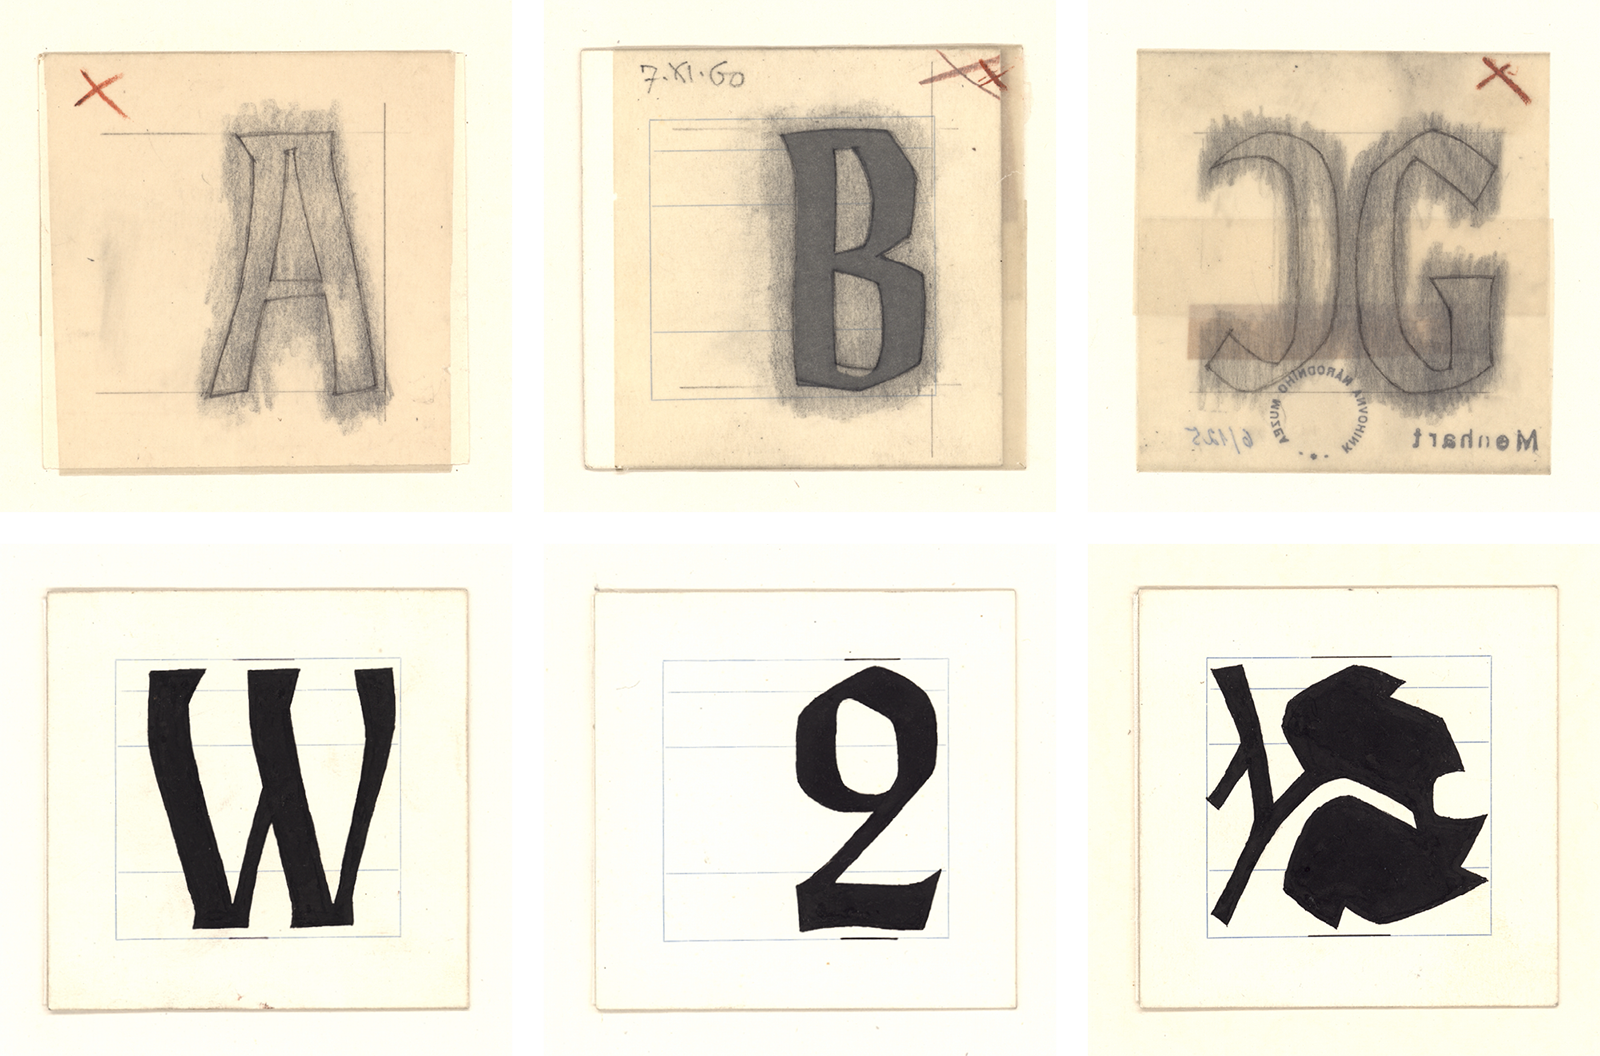 The original pencil and ink cards with designs for the Vajgar typeface from the estate of Oldřich Menhart. Source: National Museum Library. [2]